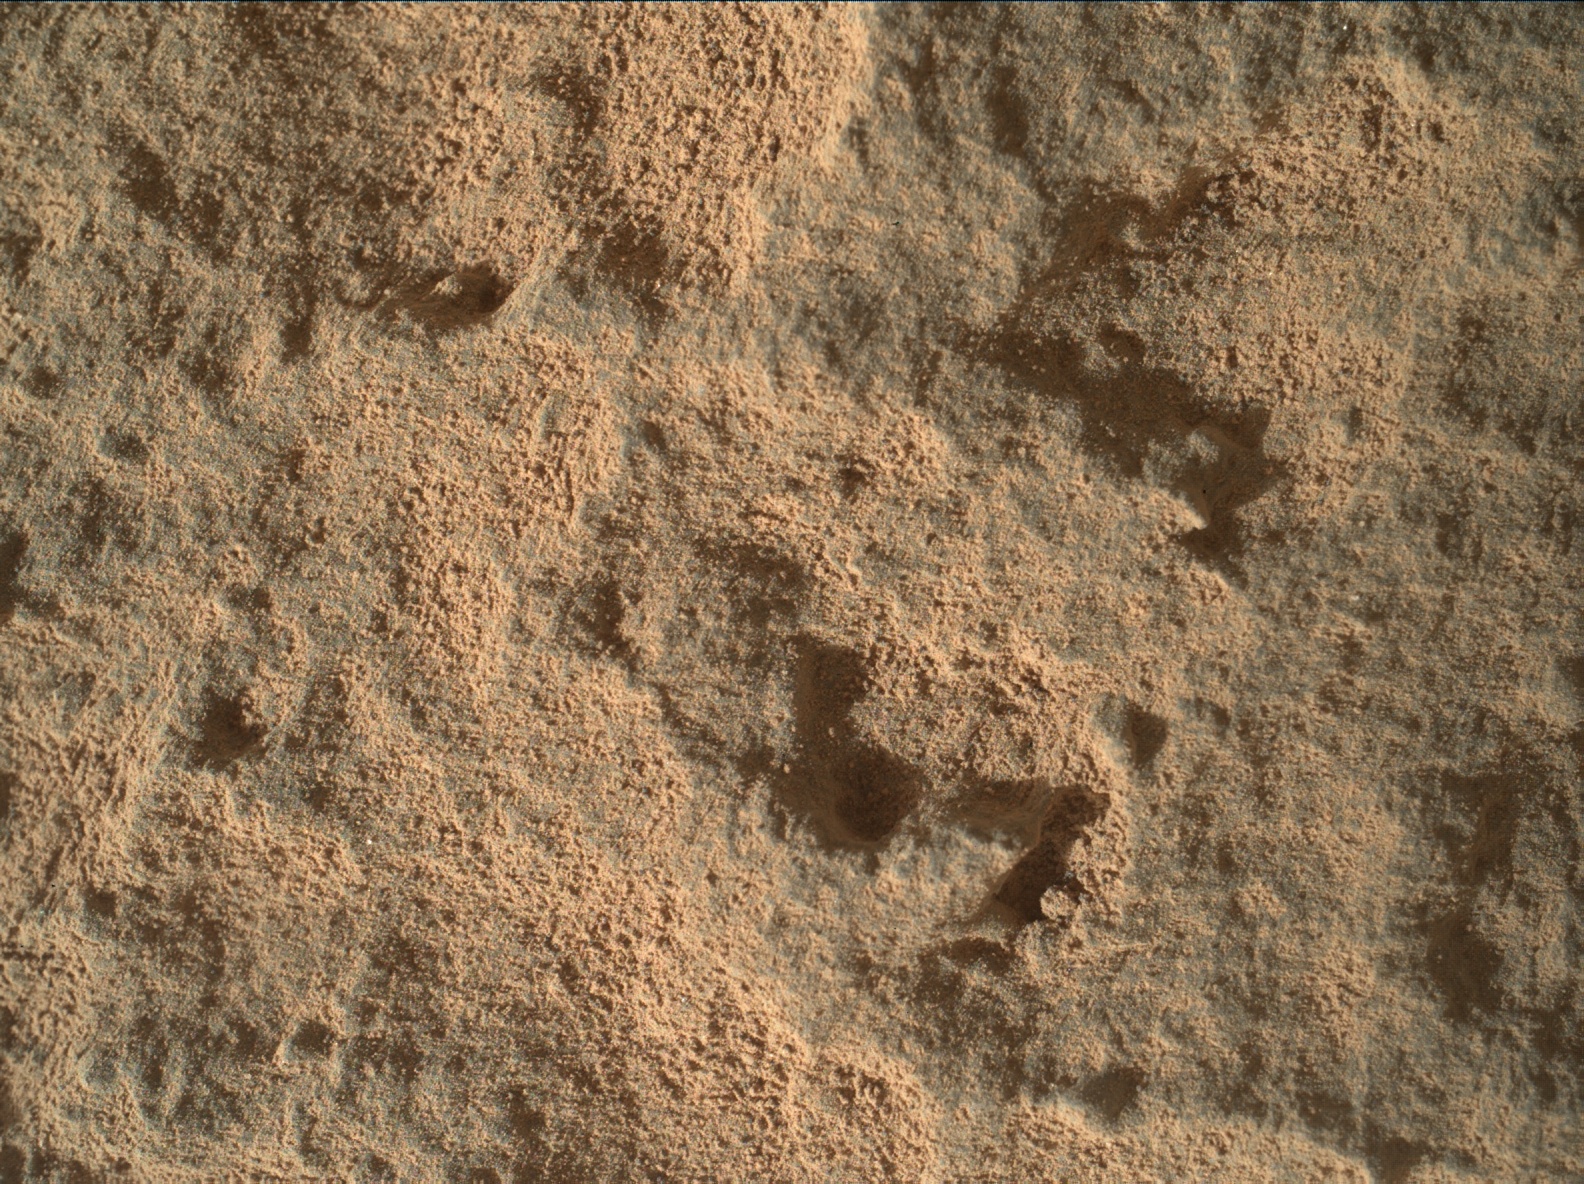 Nasa's Mars rover Curiosity acquired this image using its Mars Hand Lens Imager (MAHLI) on Sol 323